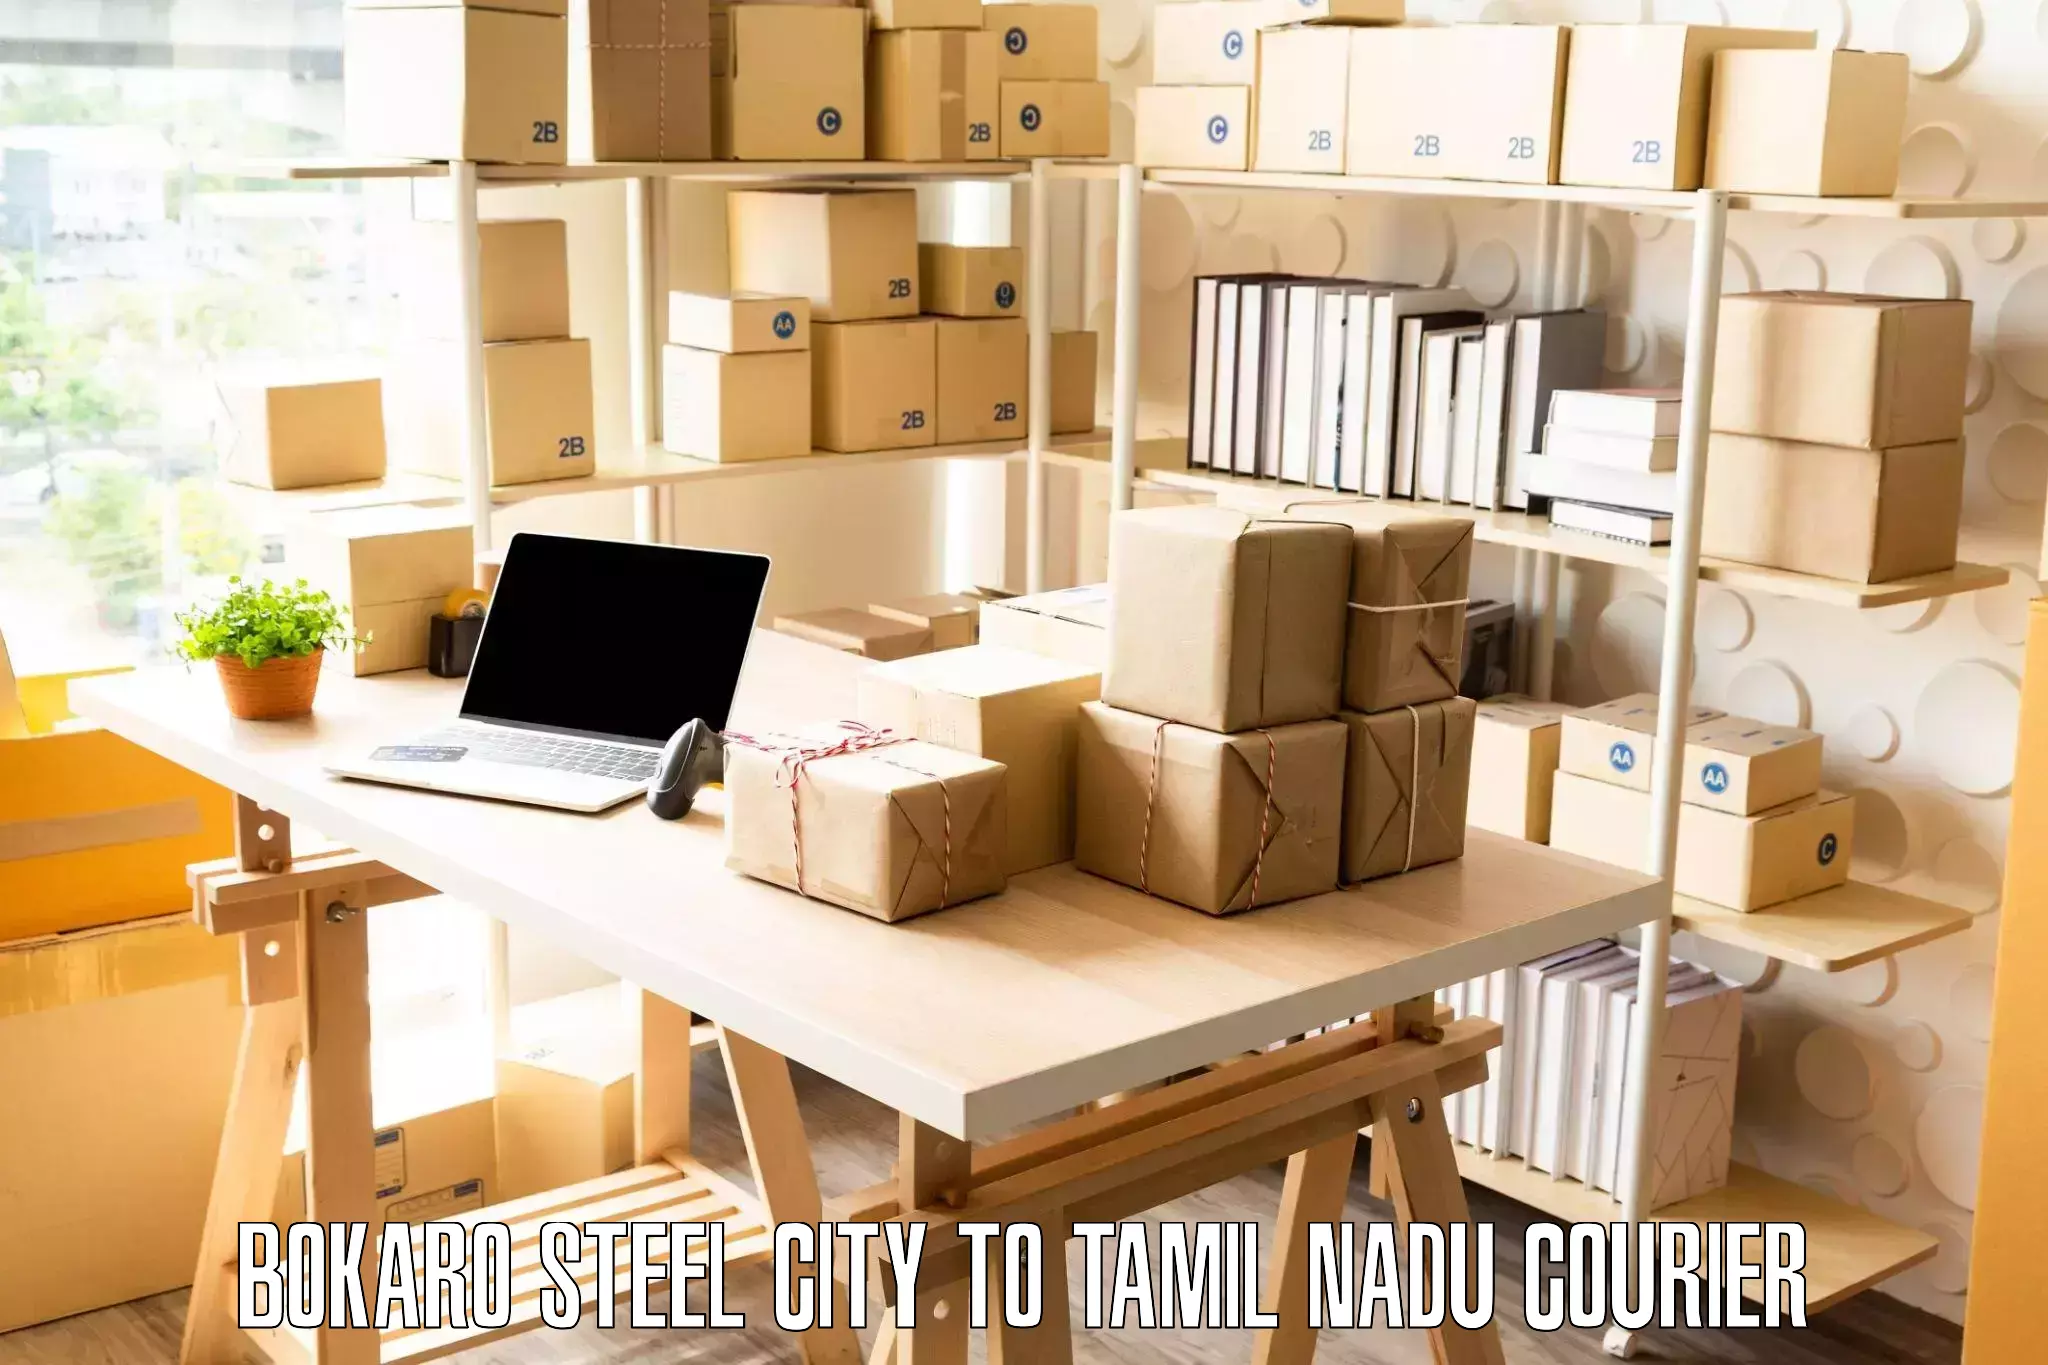 Moving and storage services Bokaro Steel City to Tamil Nadu